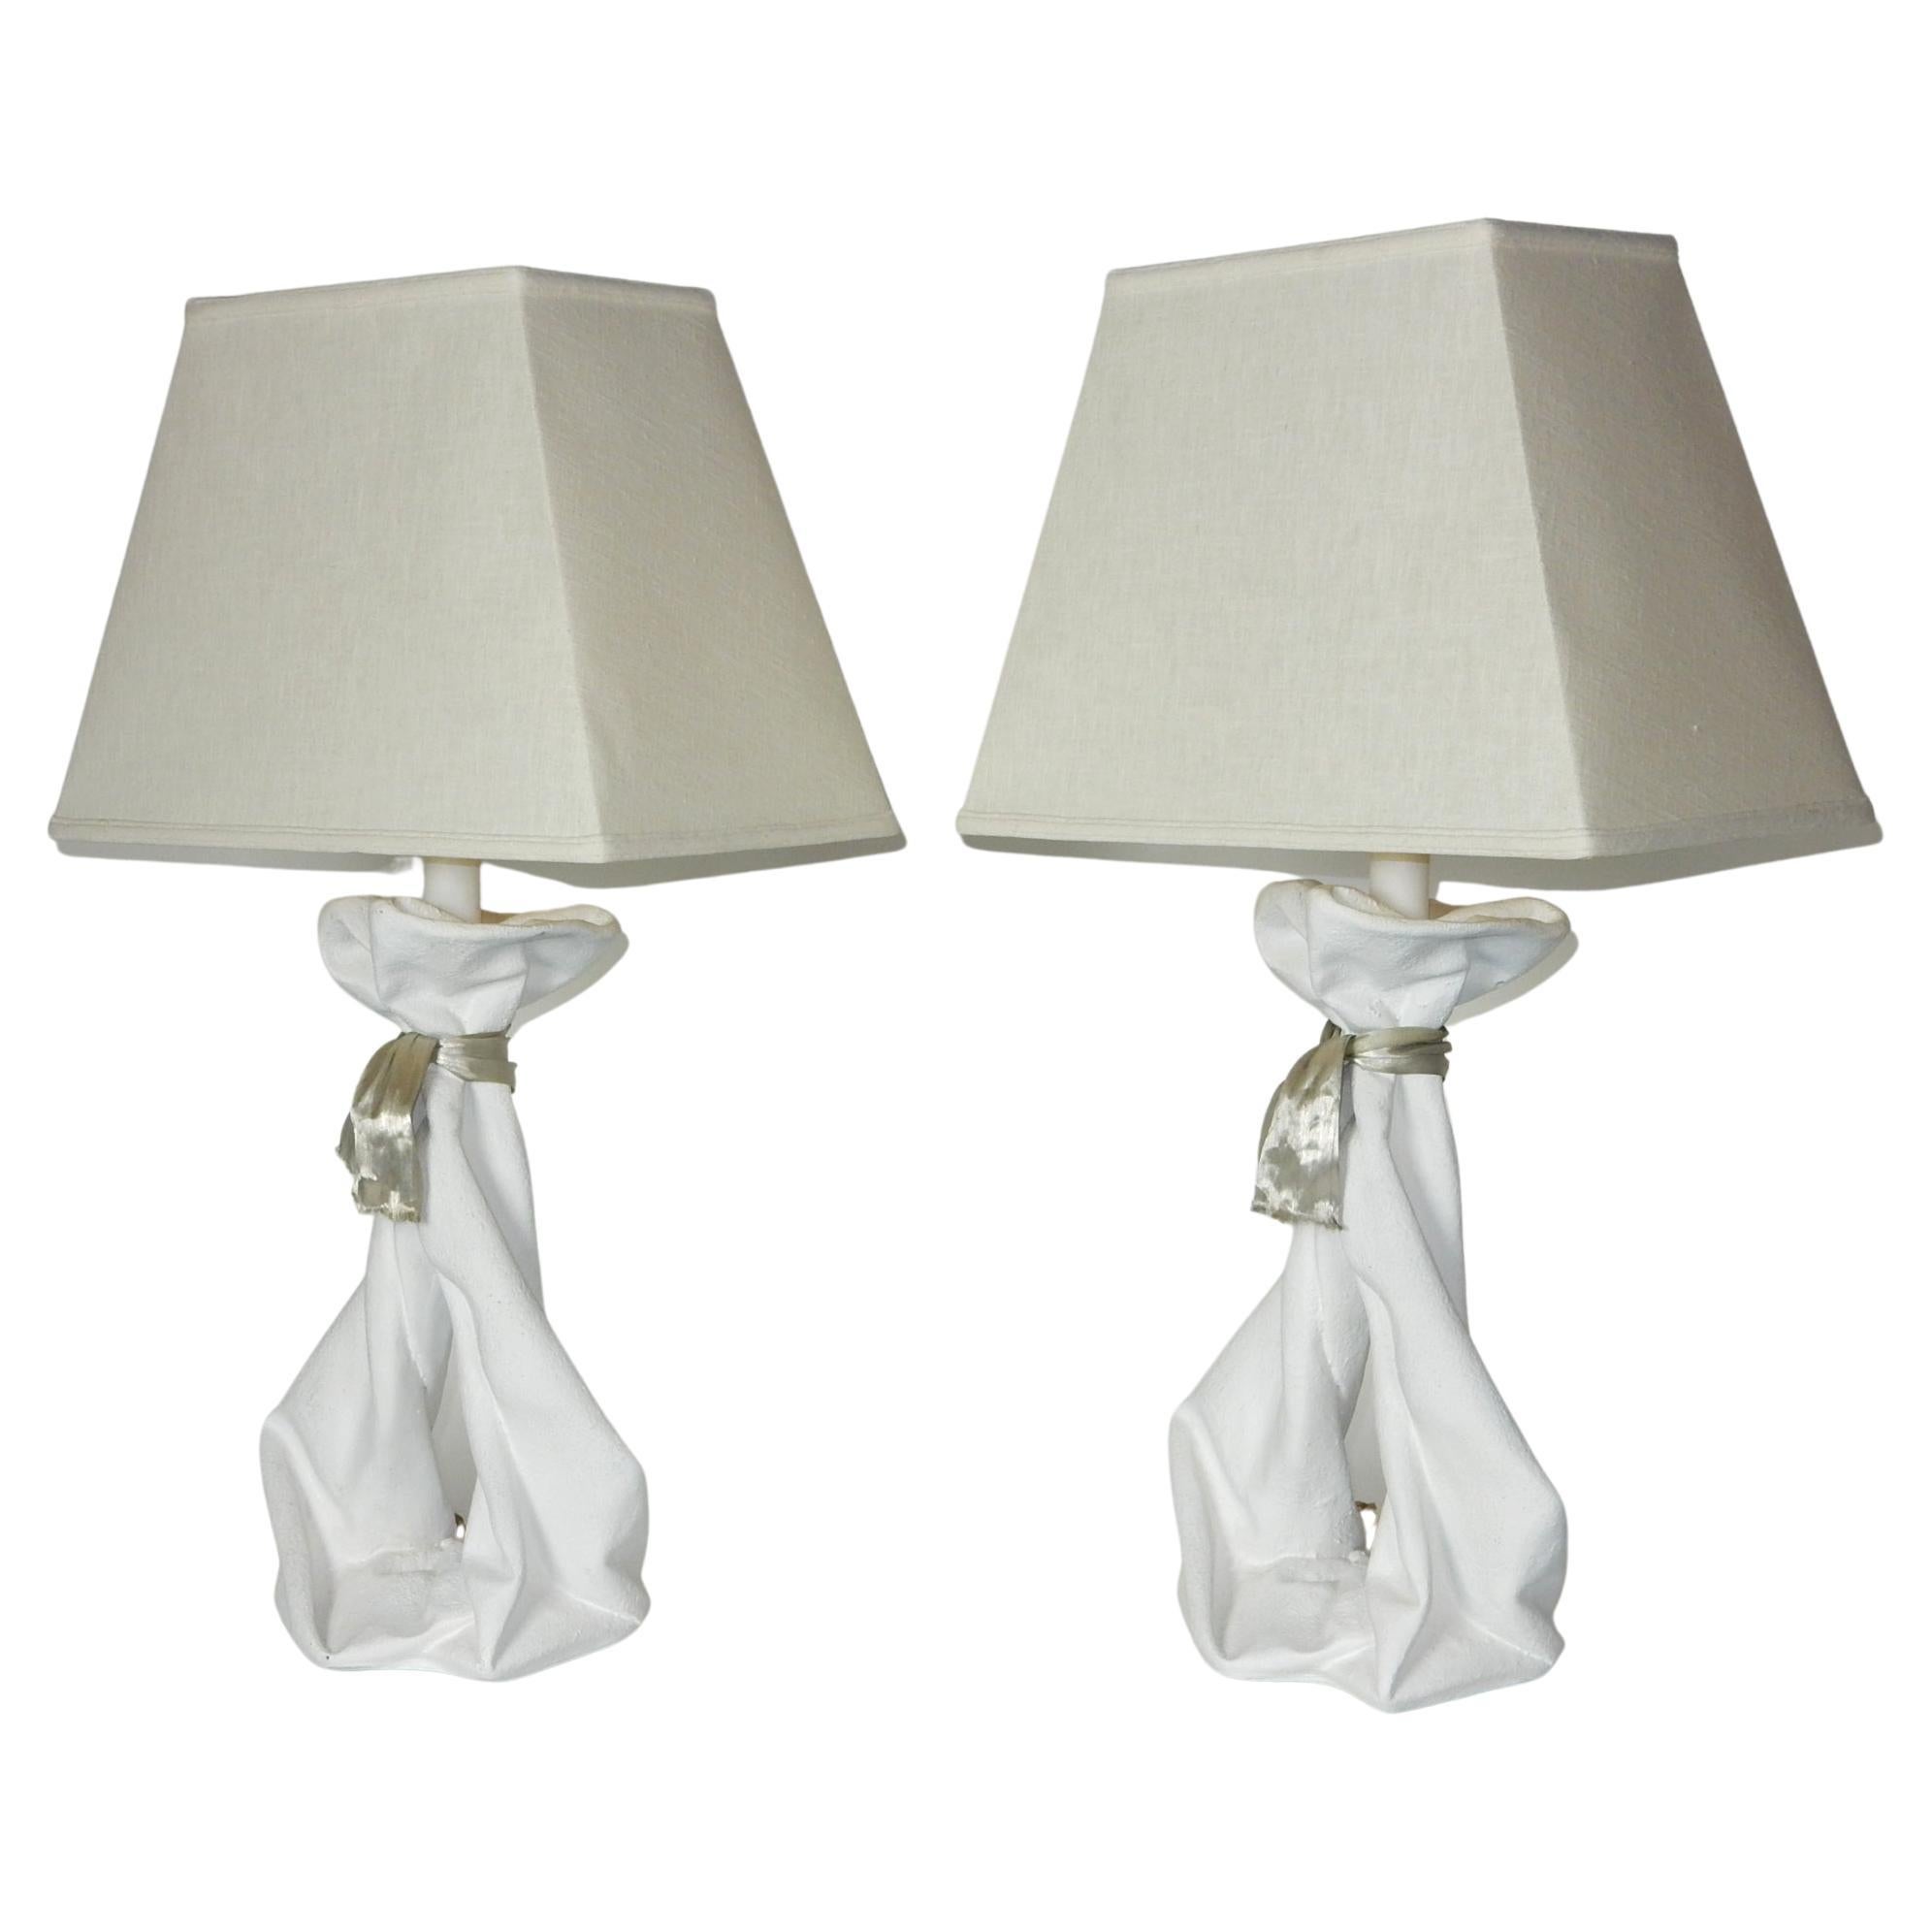 A realistic pair of draped plaster table lamps from the late 1970's or early 80's..
Chalky white plaster molded into flowing drapery
tied off with a metallic ribbon. 
Large size measuring 24in to socket.
These show well with no chips, cracks nor